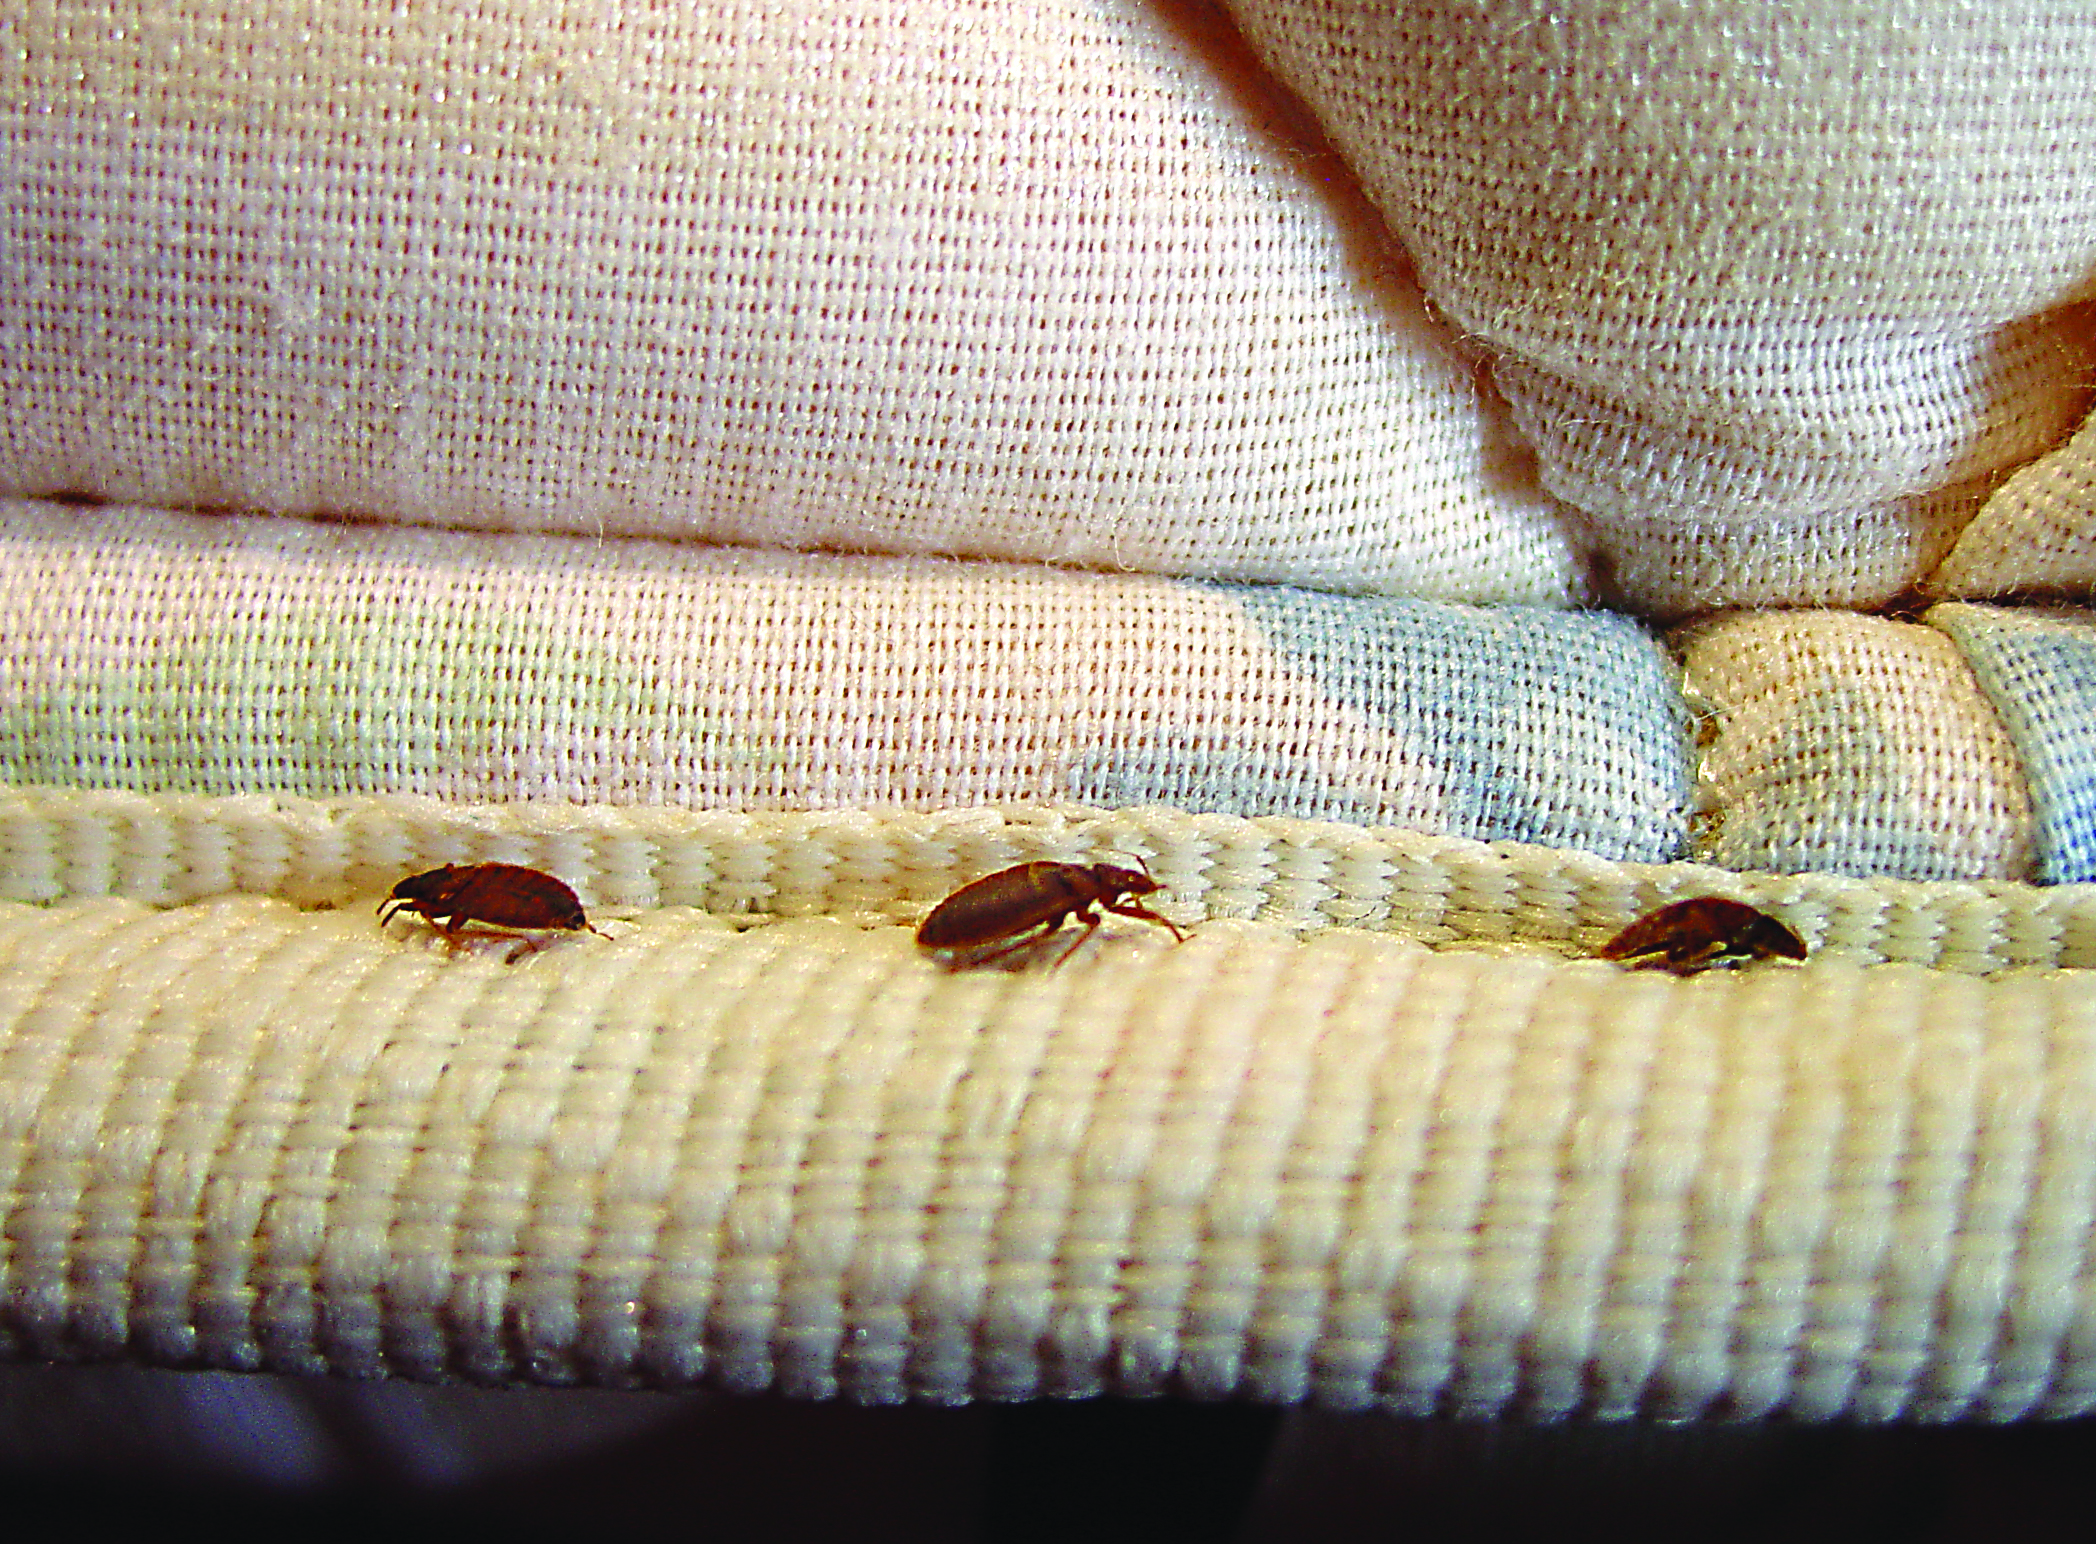 pics of bed bugs on mattresses